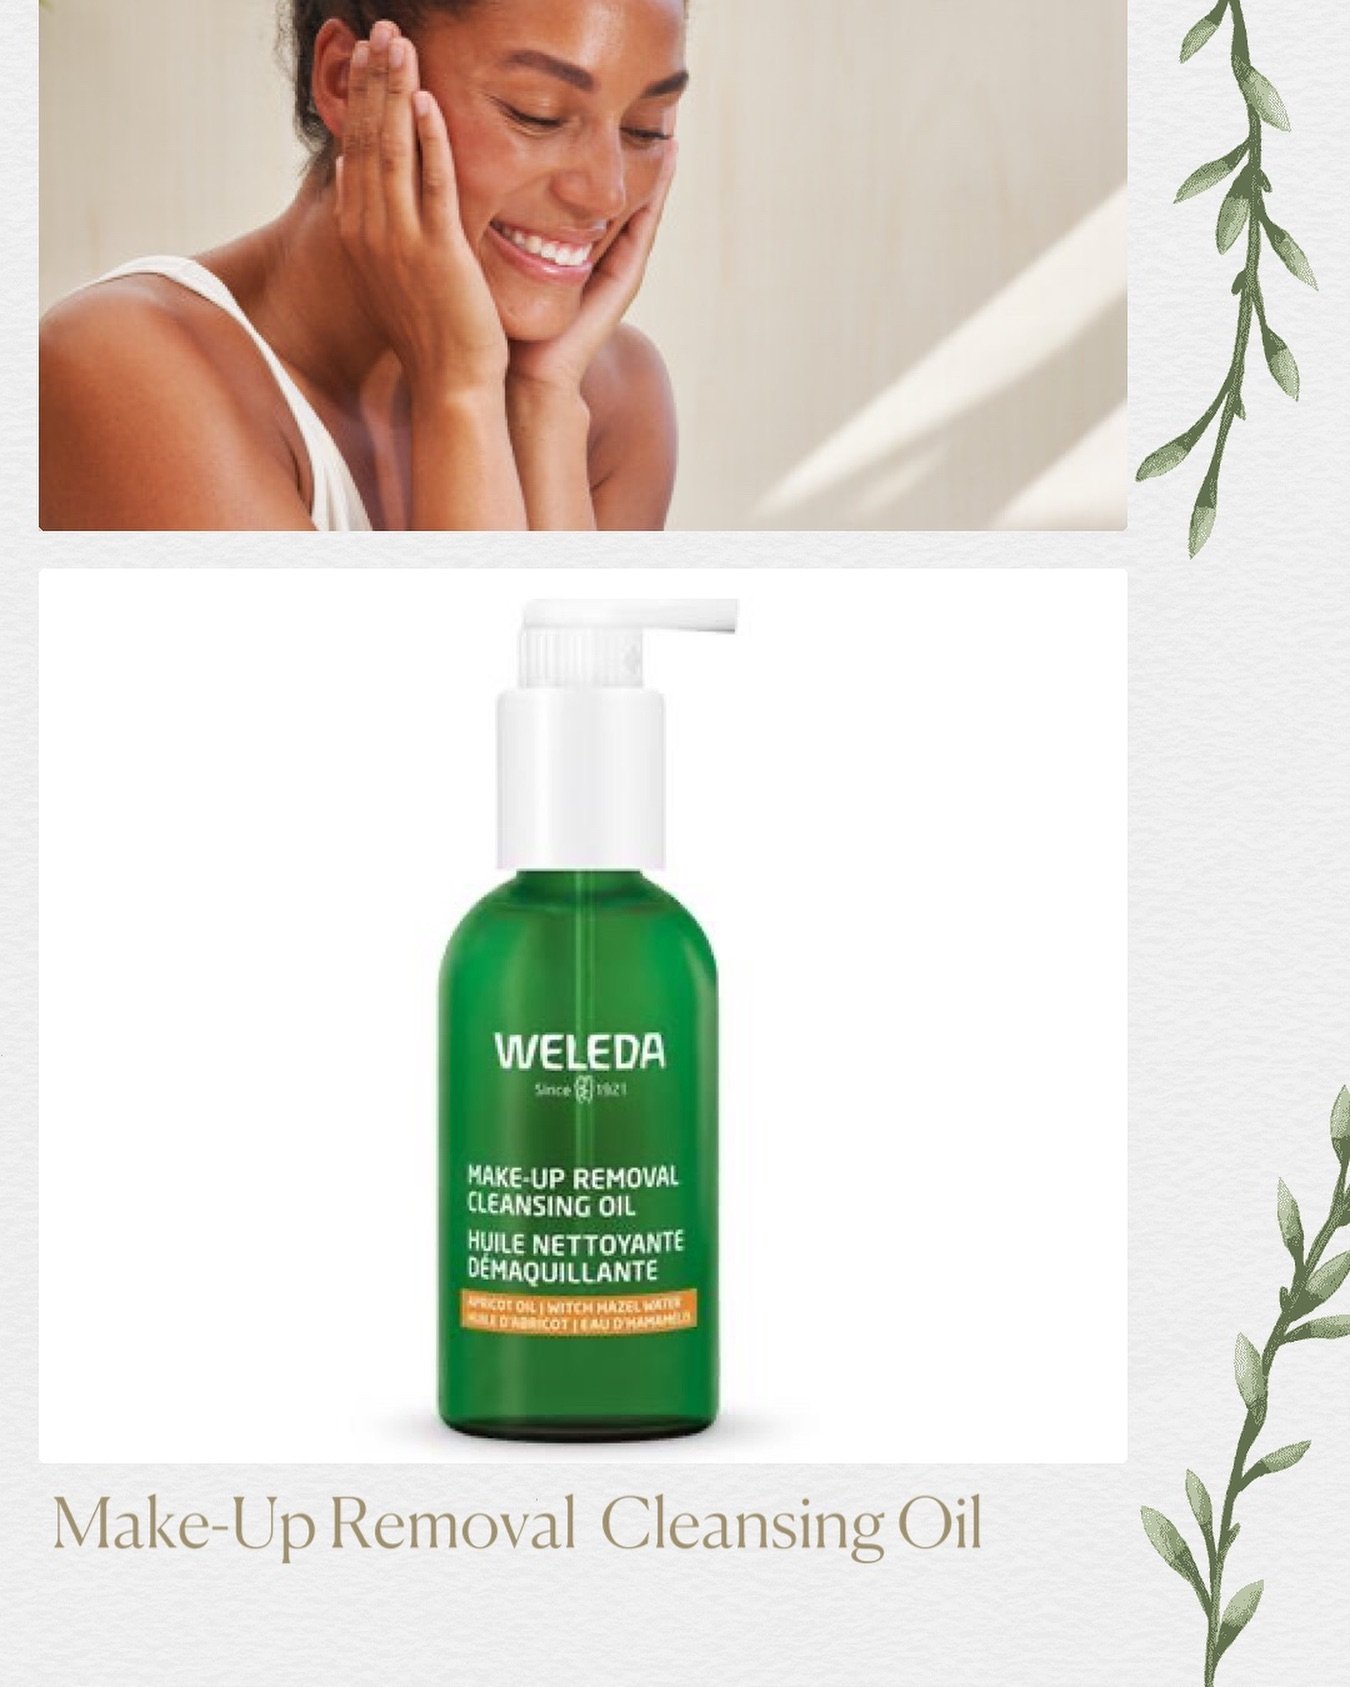 *NEW* Make-Up Removal Cleansing Oil 🌿 @weledauk 

Plant-based, fragrance free cleansing oil to melt away make-up and impurities with ease.
Safe to use around eyes too.
Dispense 1 pump onto dry hands and straight onto a dry face, spend a couple of mi